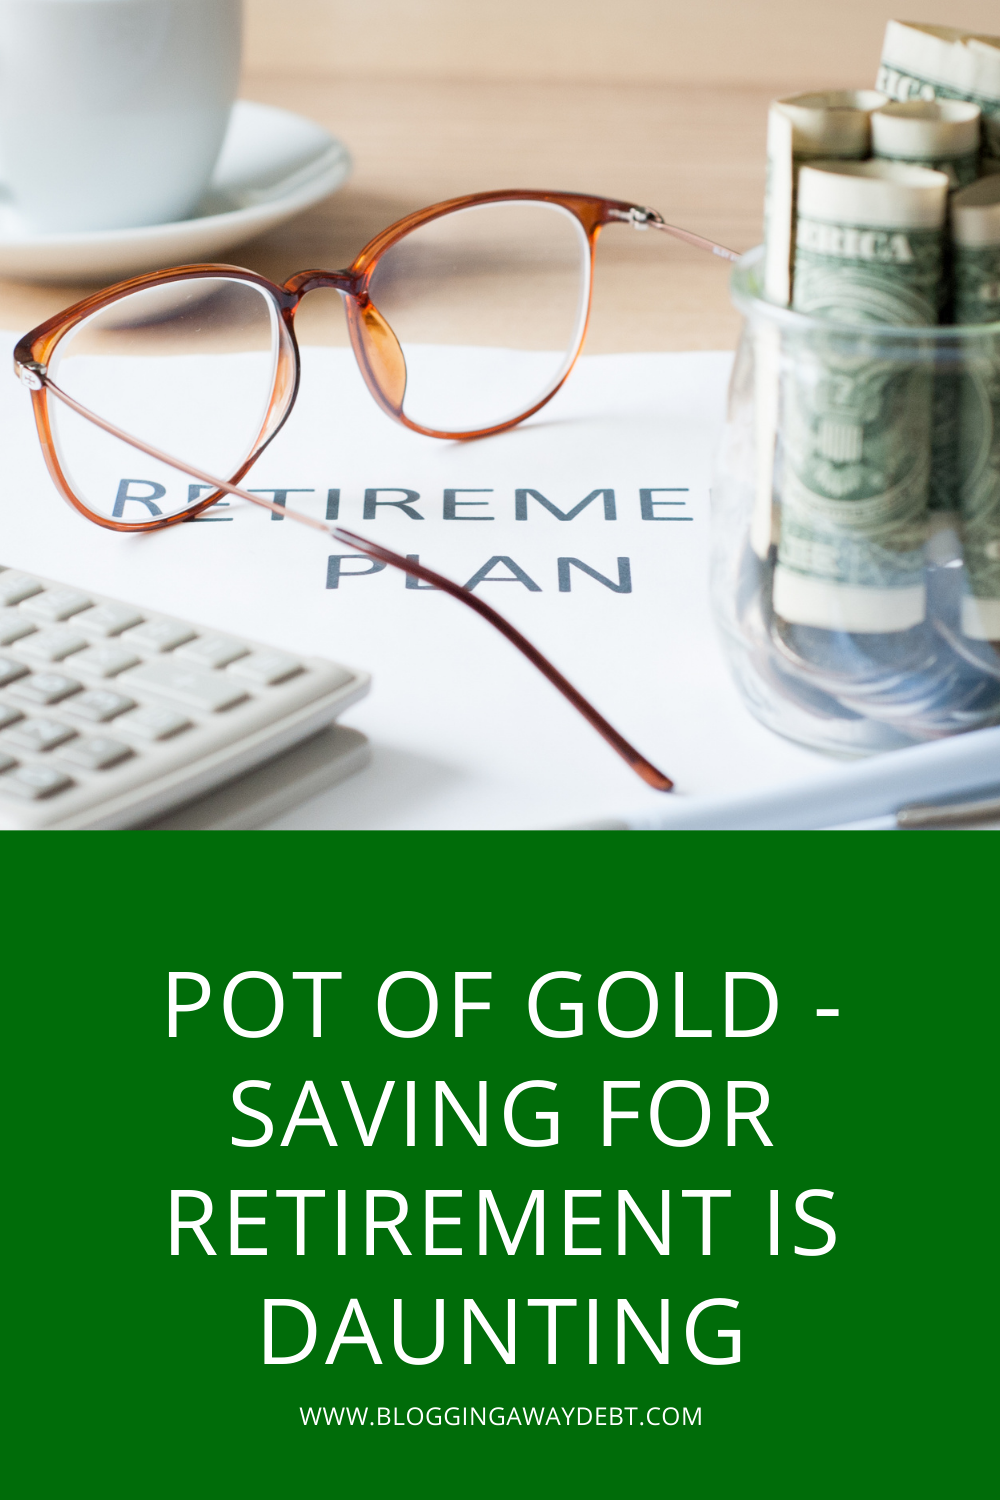 Pot of Gold - Saving for Retirement is Daunting